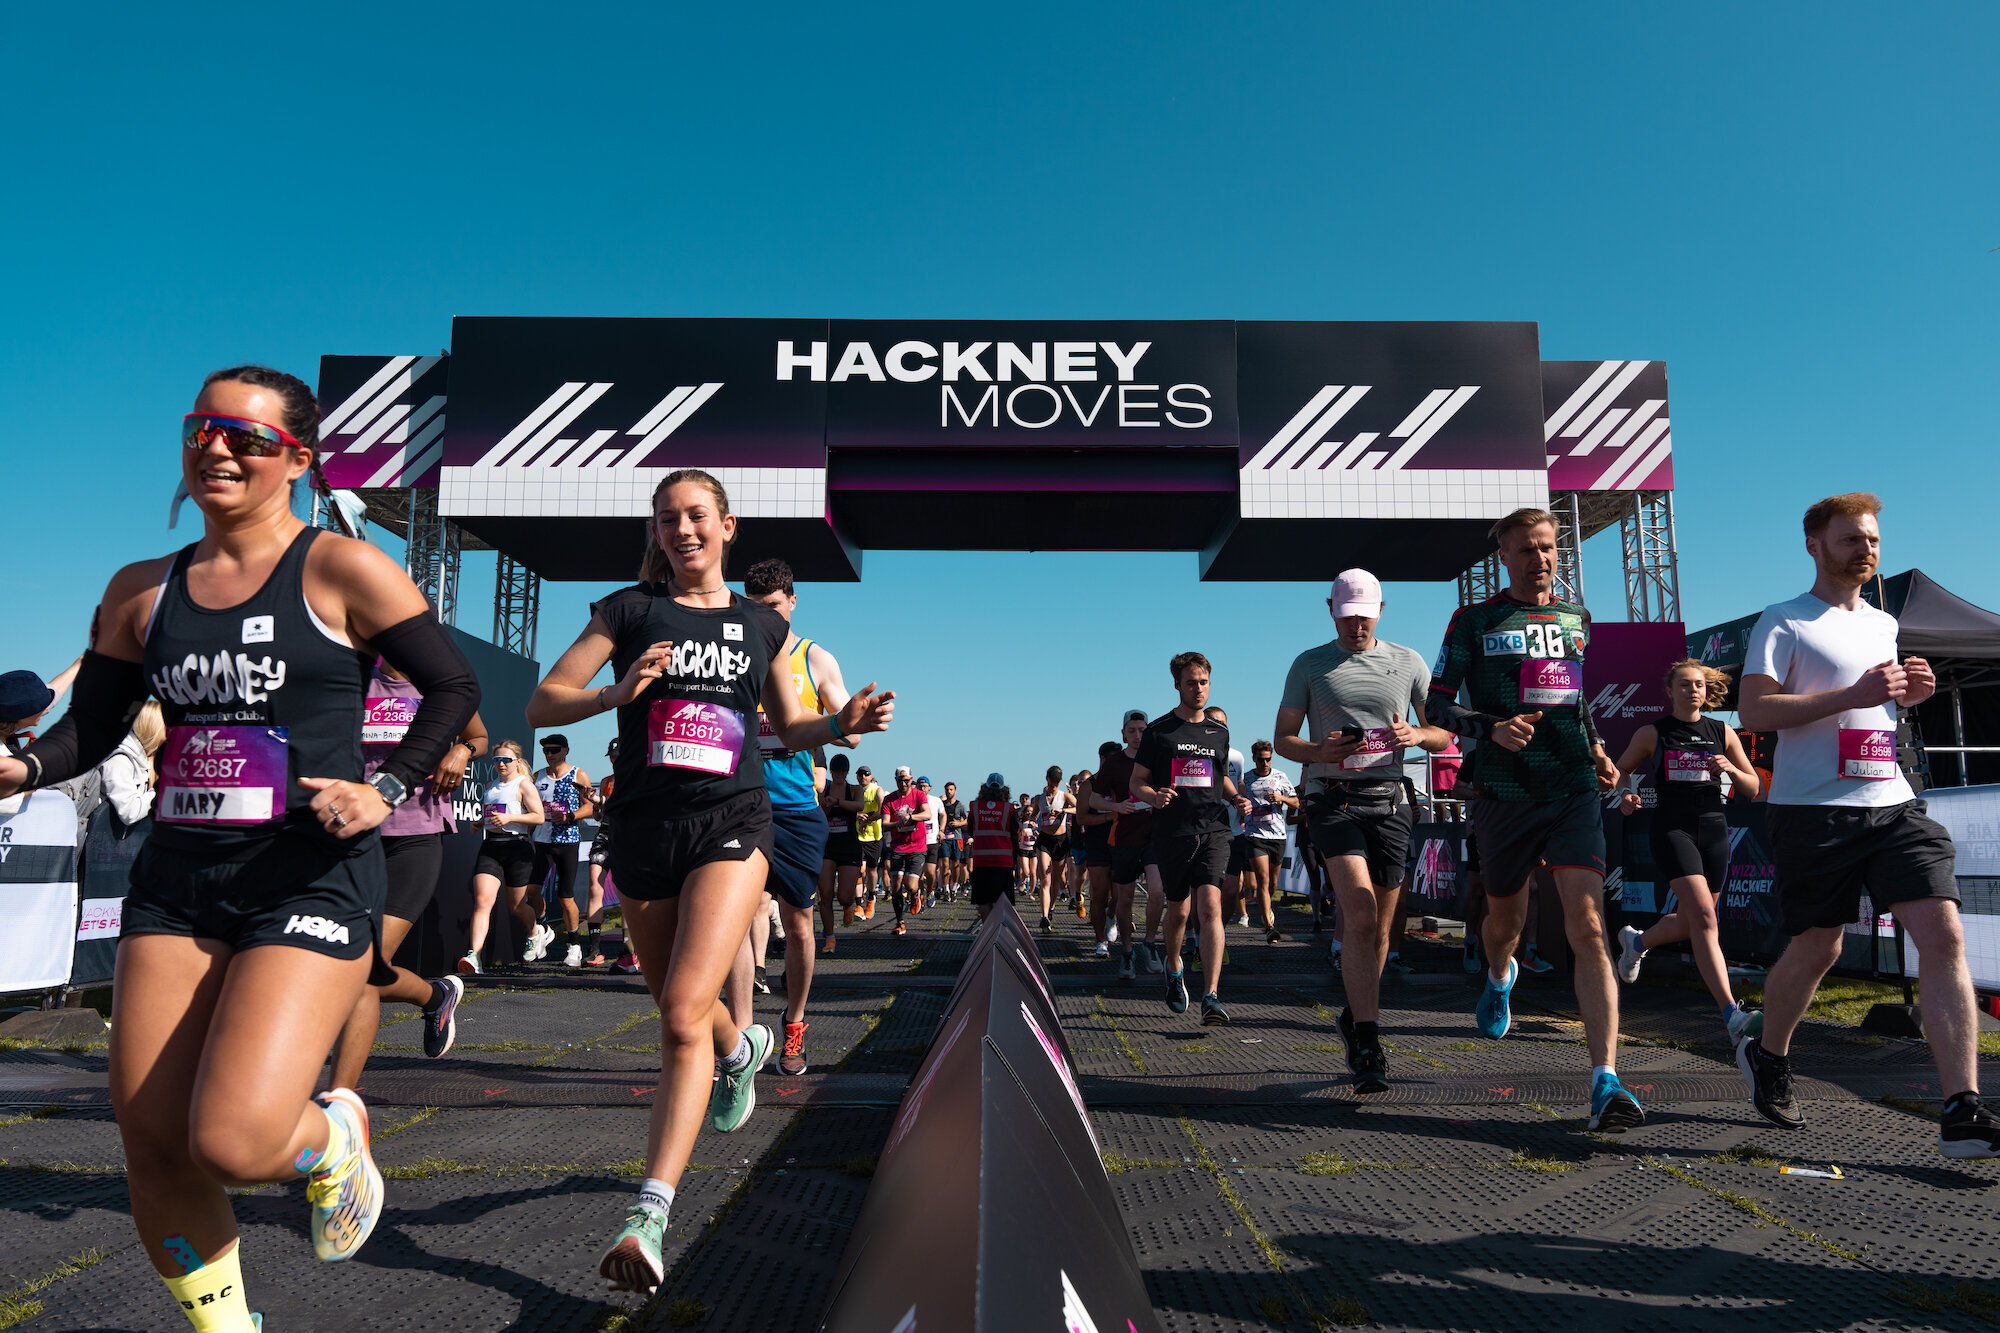 WIZZ AIR HACKNEY HALF 2023 ✅

What an epic weekend! Thank you to every single one of you who ran, cheered, danced and laughed with us. A huge thank you to the Hackney community and all the people behind the scenes, on the course and on the front line